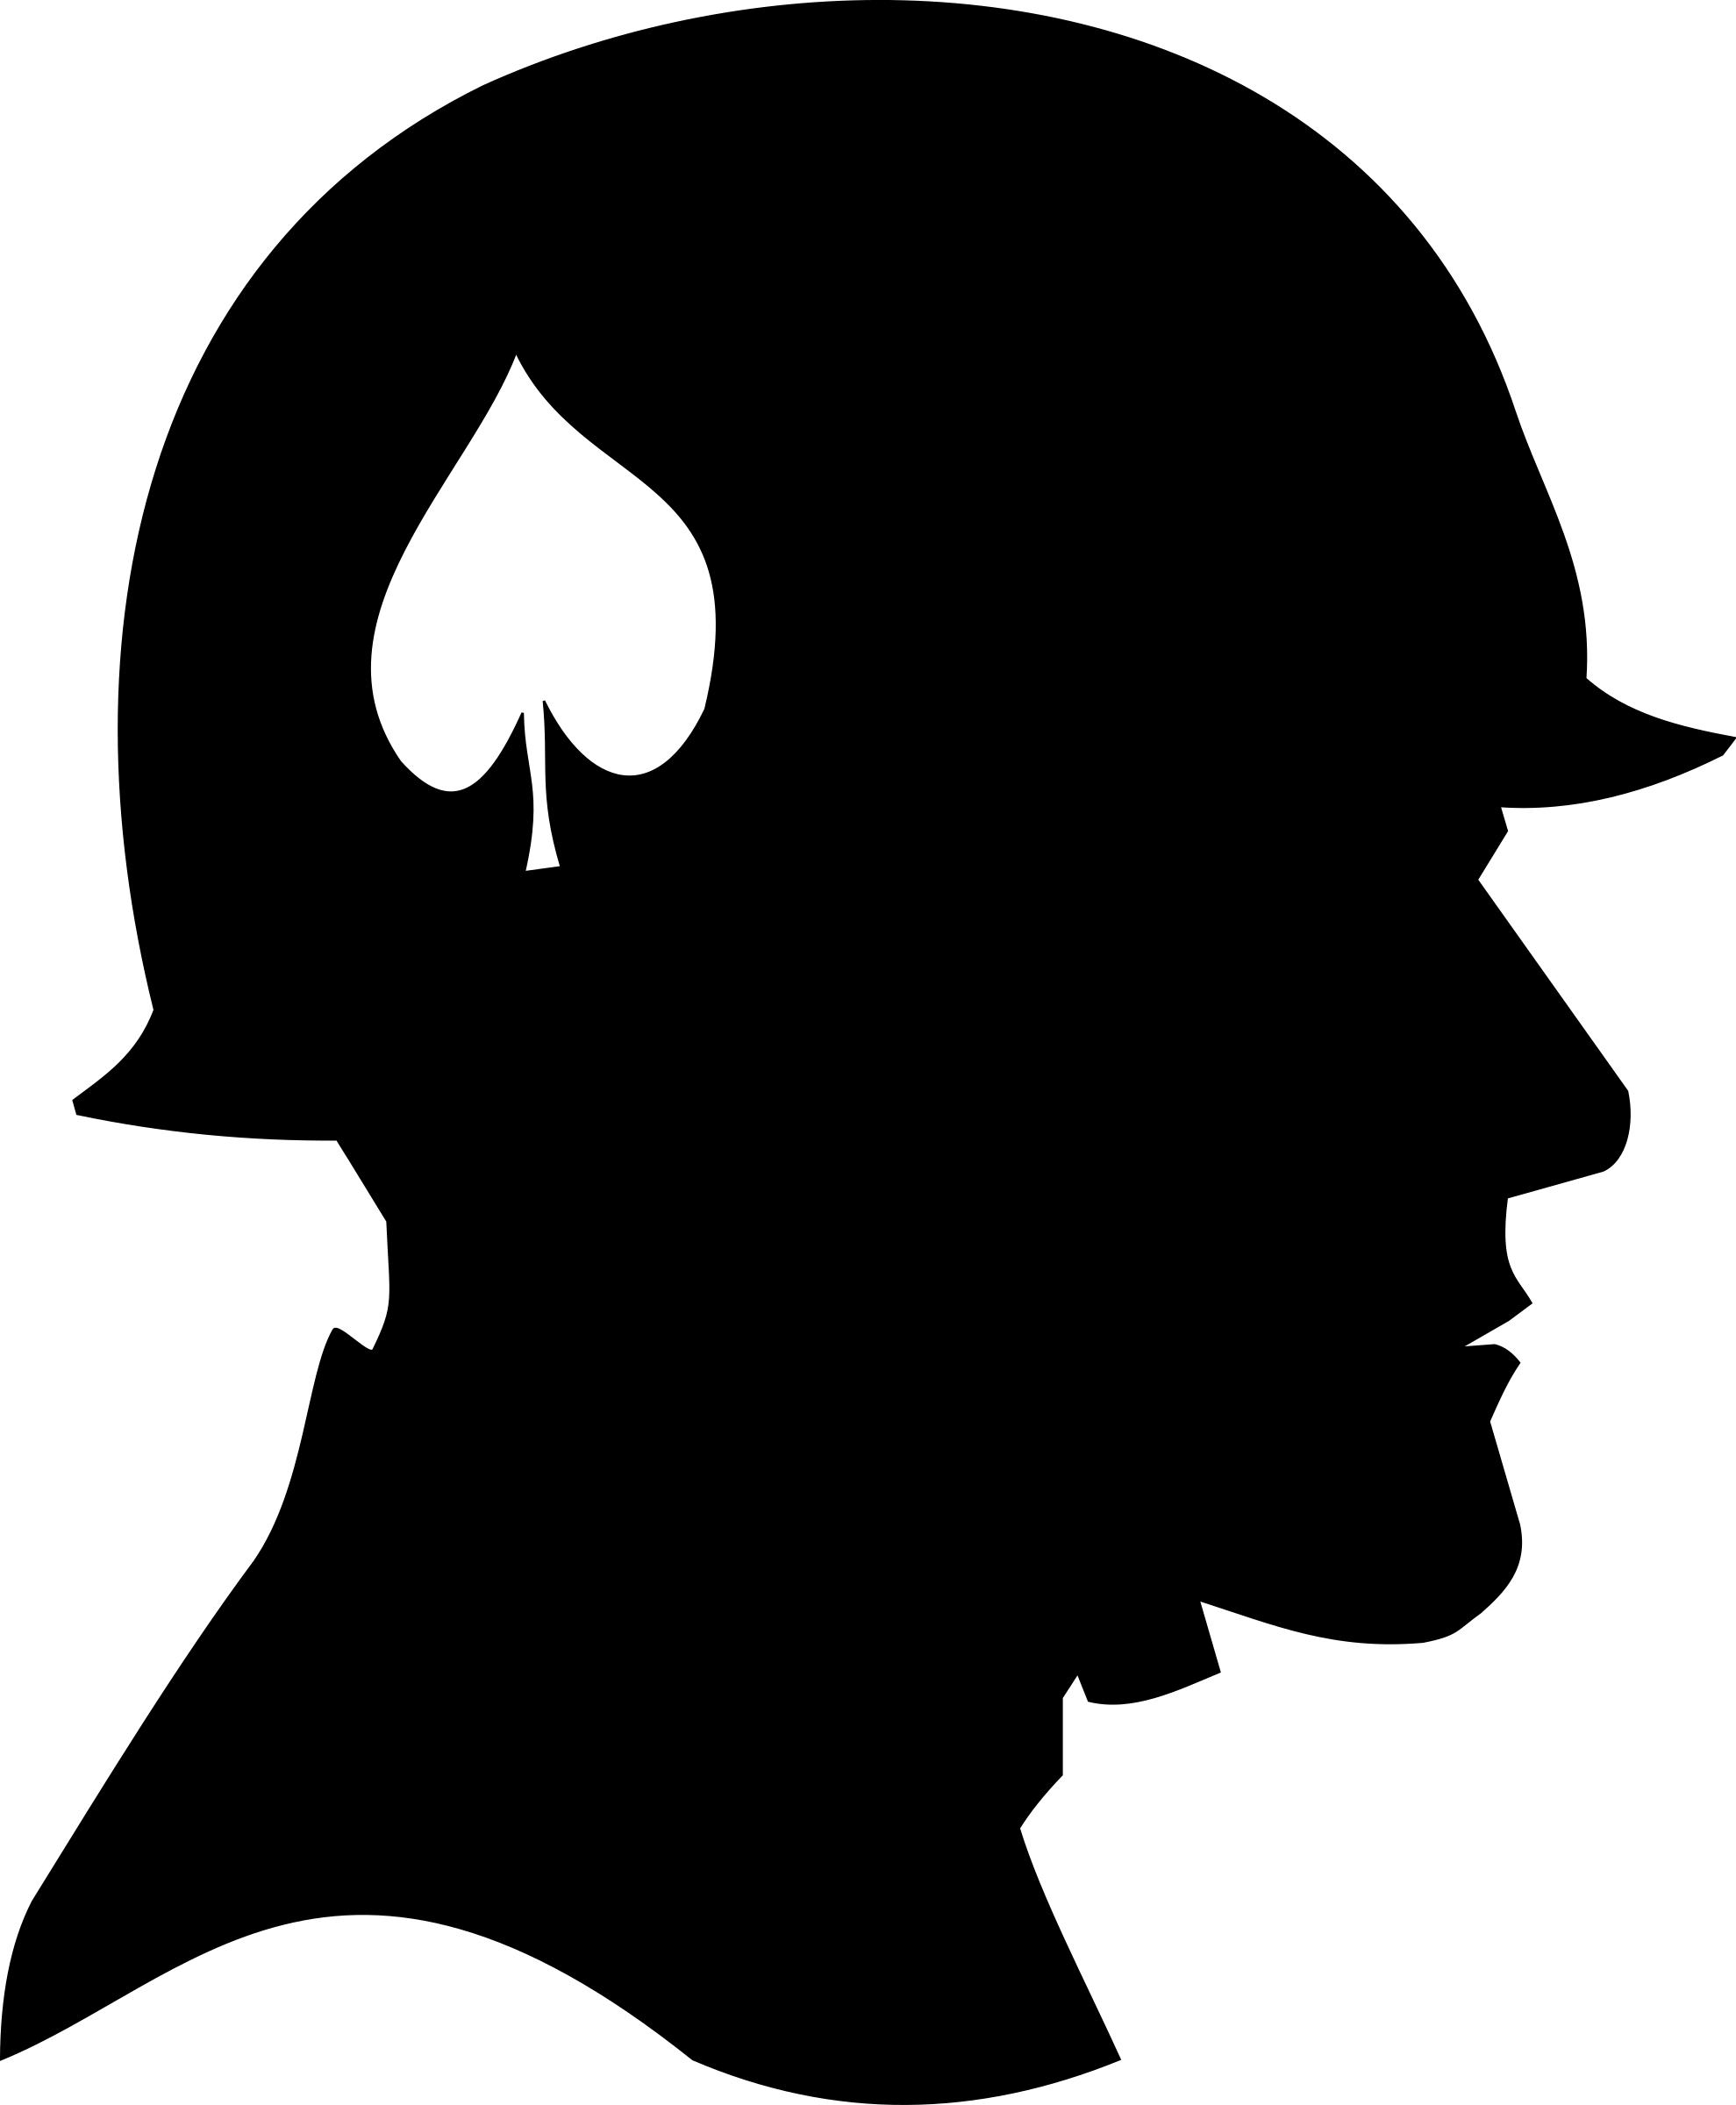 U.S. World War Two Soldier Silhouette PNG icons